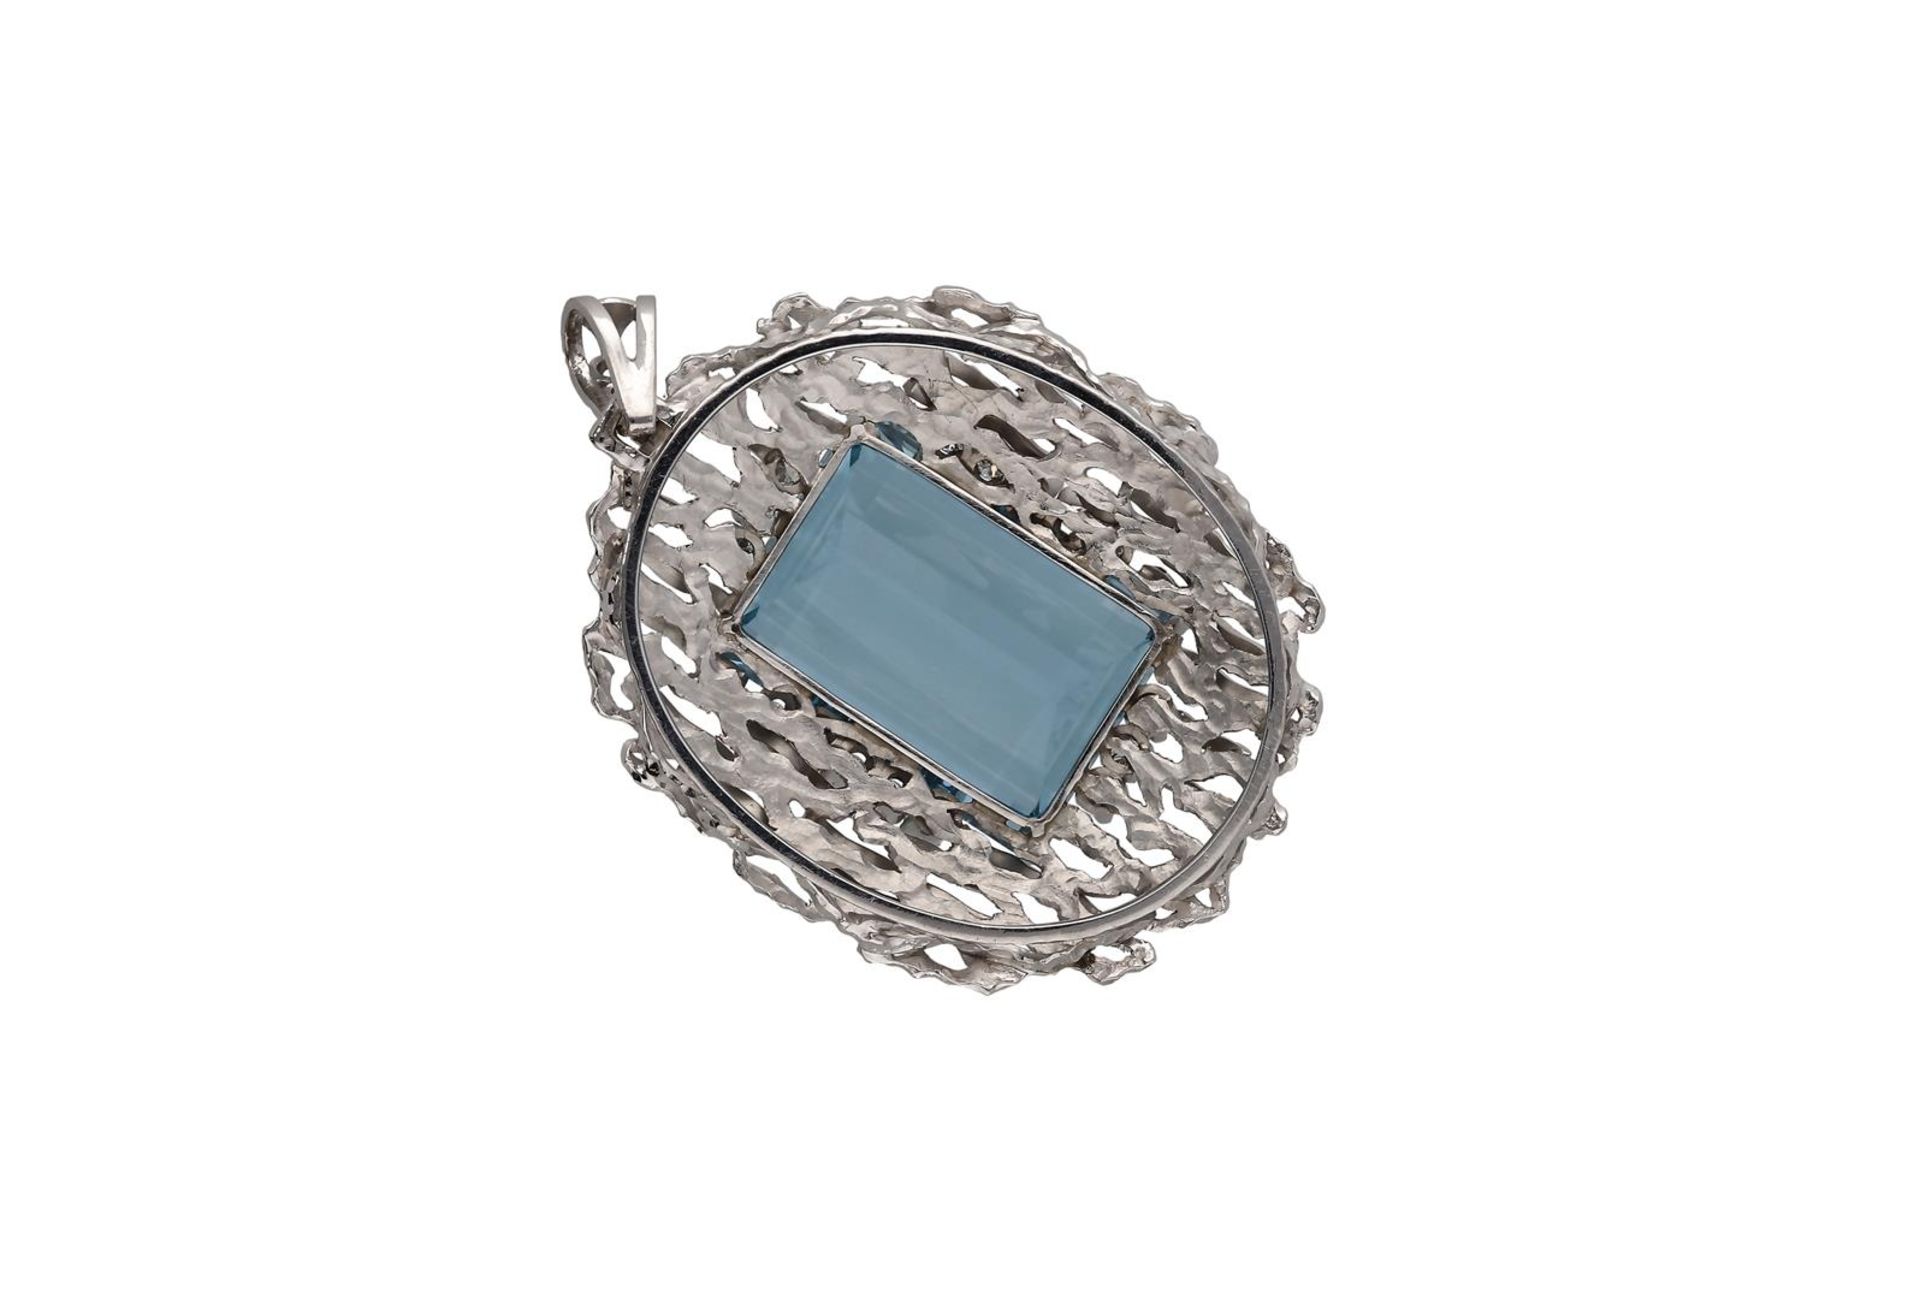 A white gold pendant, set with an emerald cut aquamarine of approx. 46.48 ct. and an entourage of br - Image 2 of 2